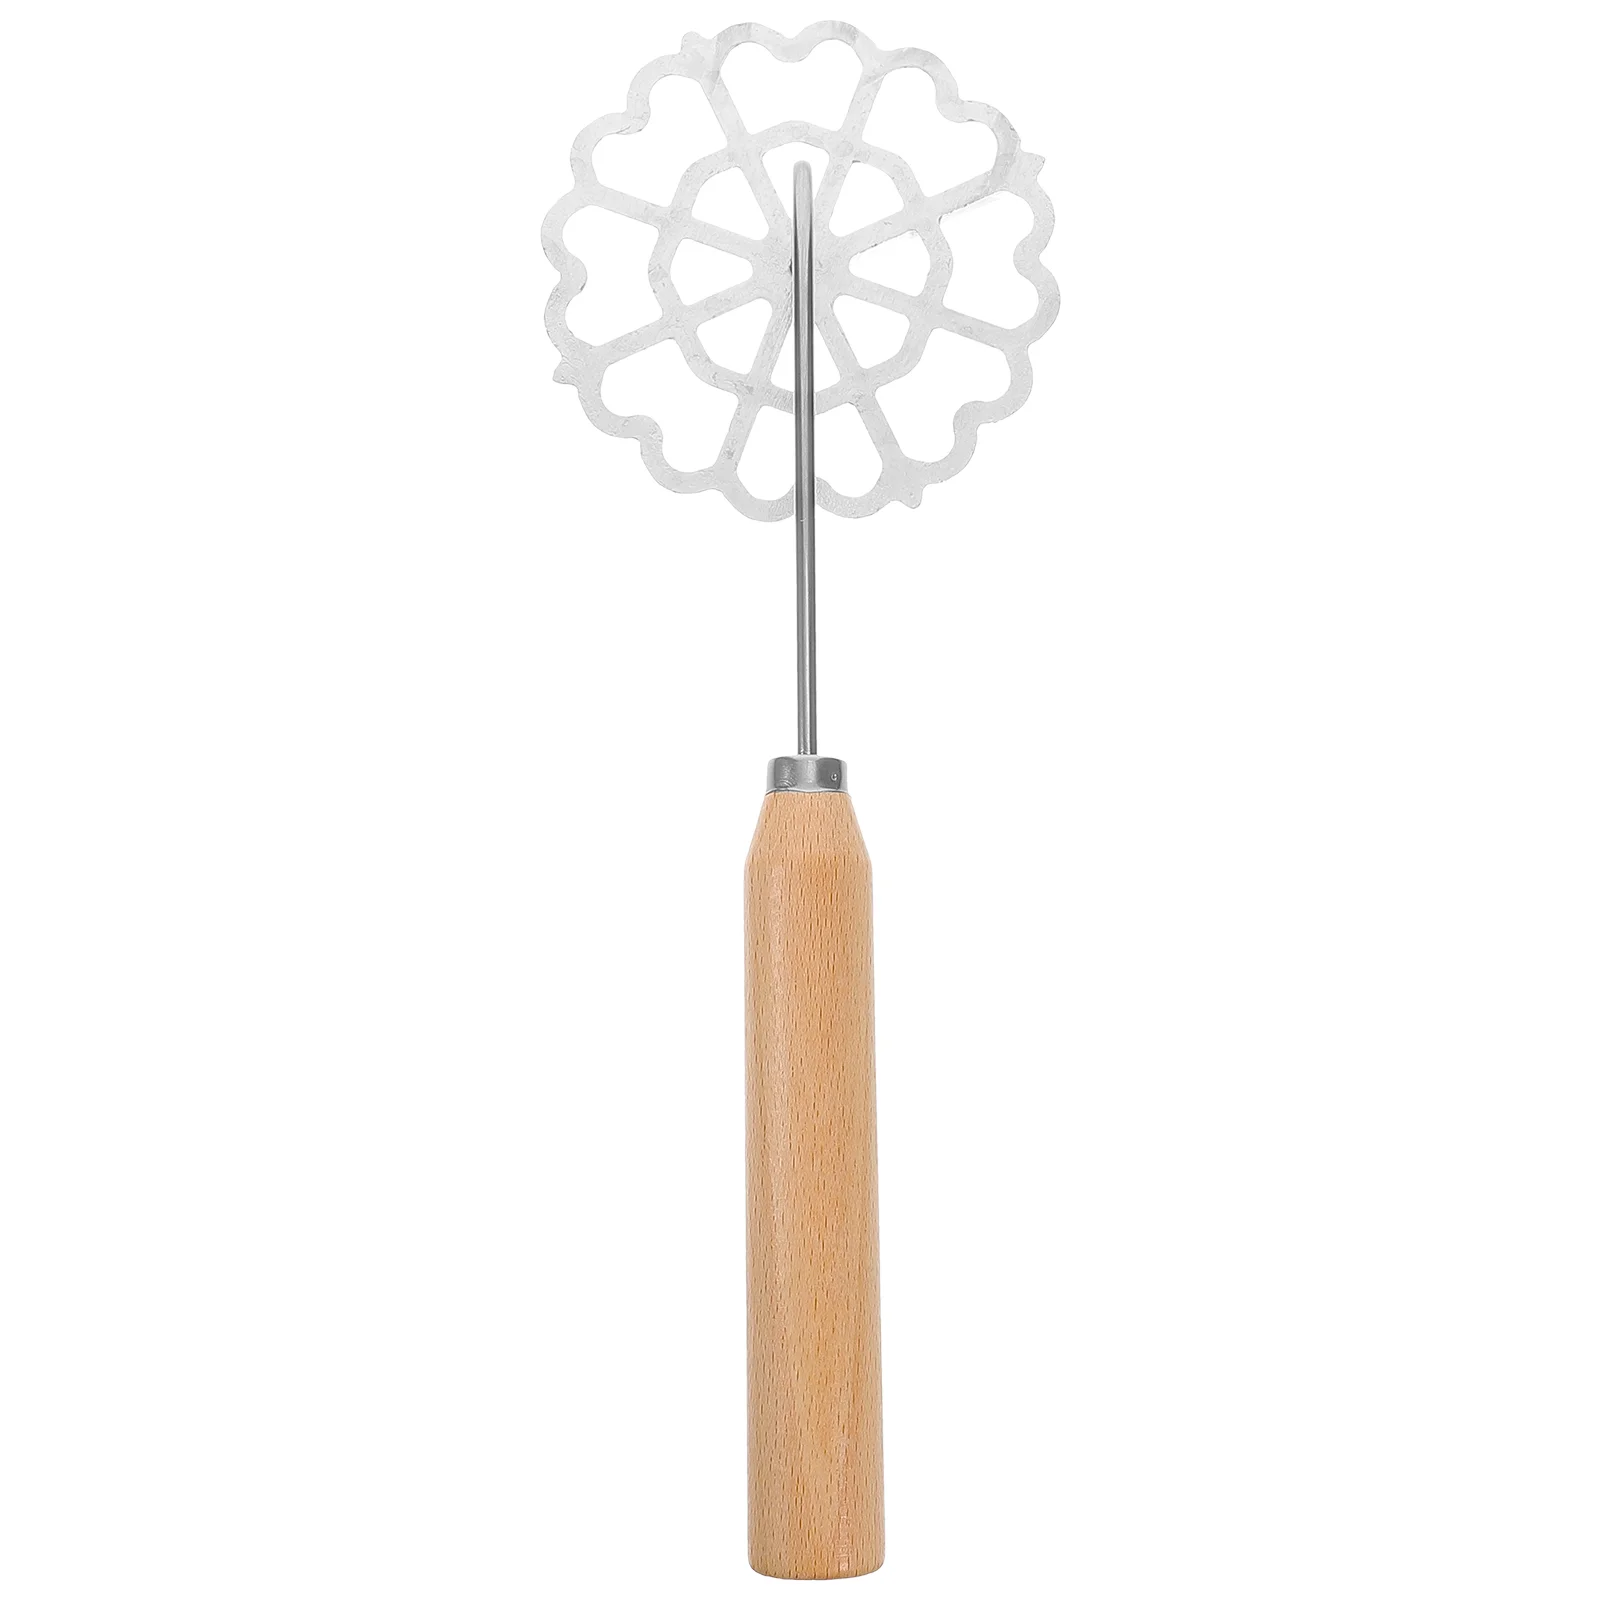 

Swedish Rosette Aluminum Waffle Mold Wooden Handle Cake Printing Cookie Pastry Mold Flower Bunuelos Mold Non-Stick Frying Spoon